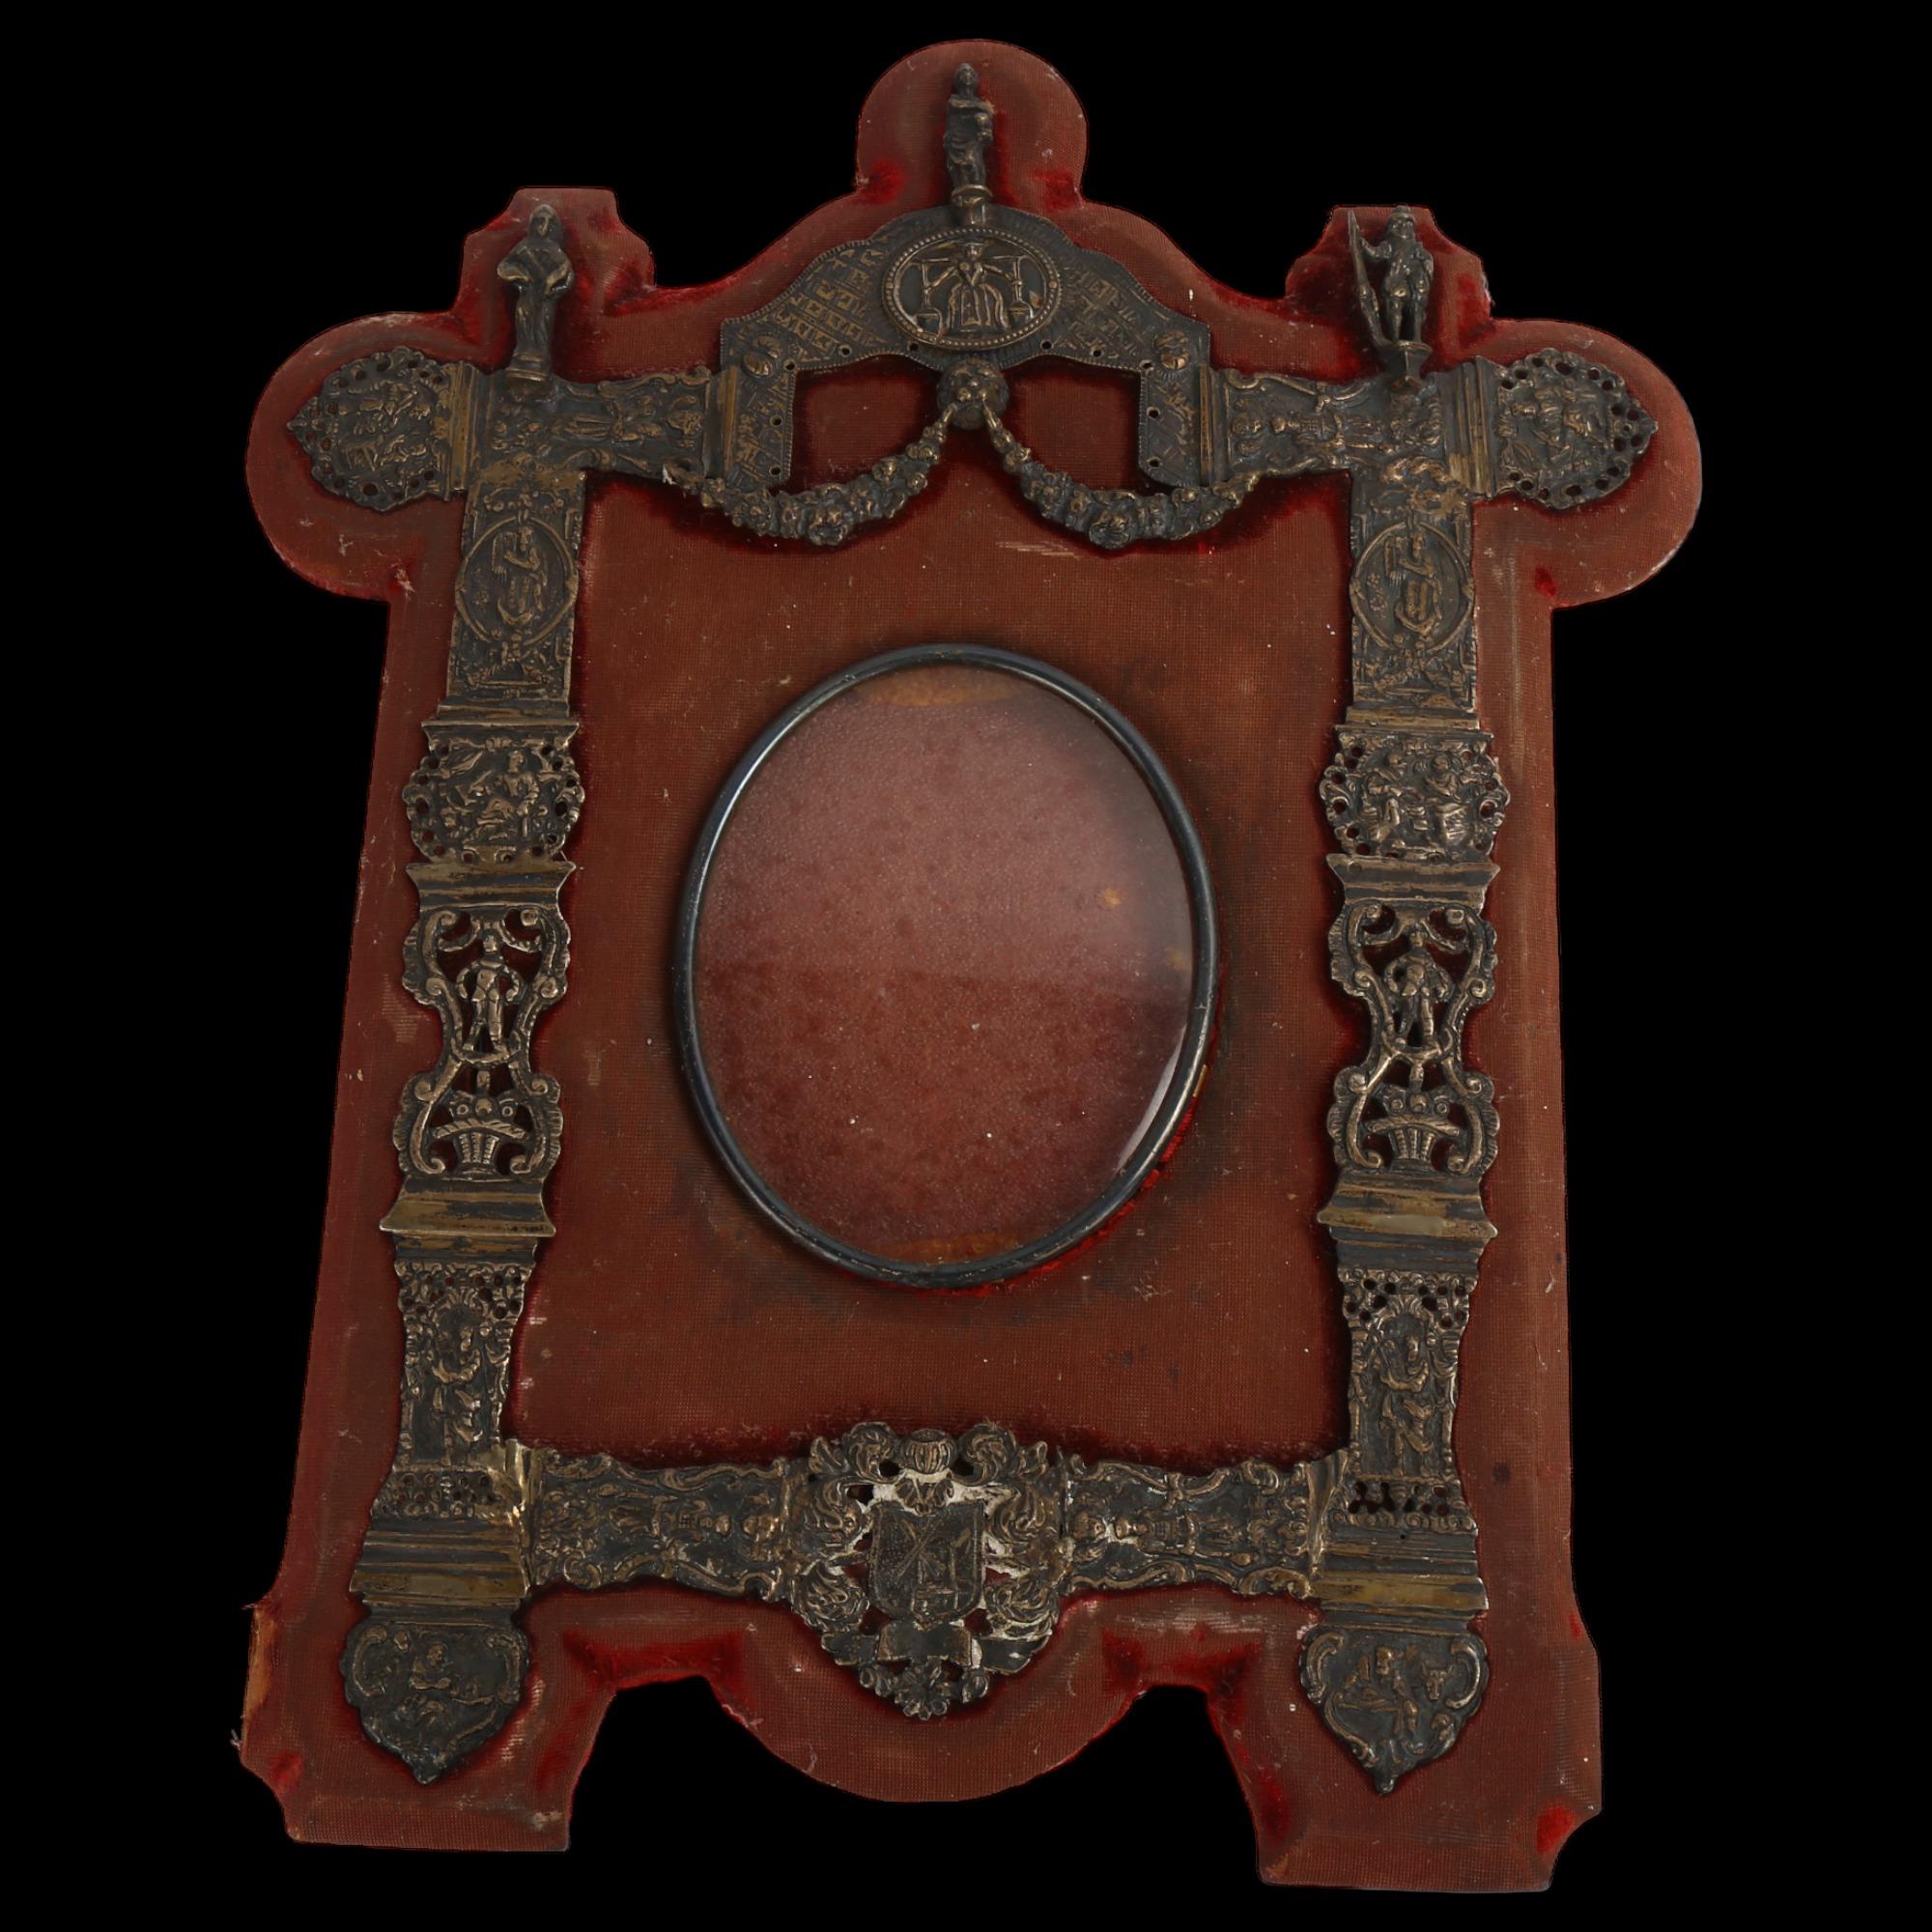 An early 20th century Dutch? silver-fronted photo frame, with relief embossed and pierced swag and